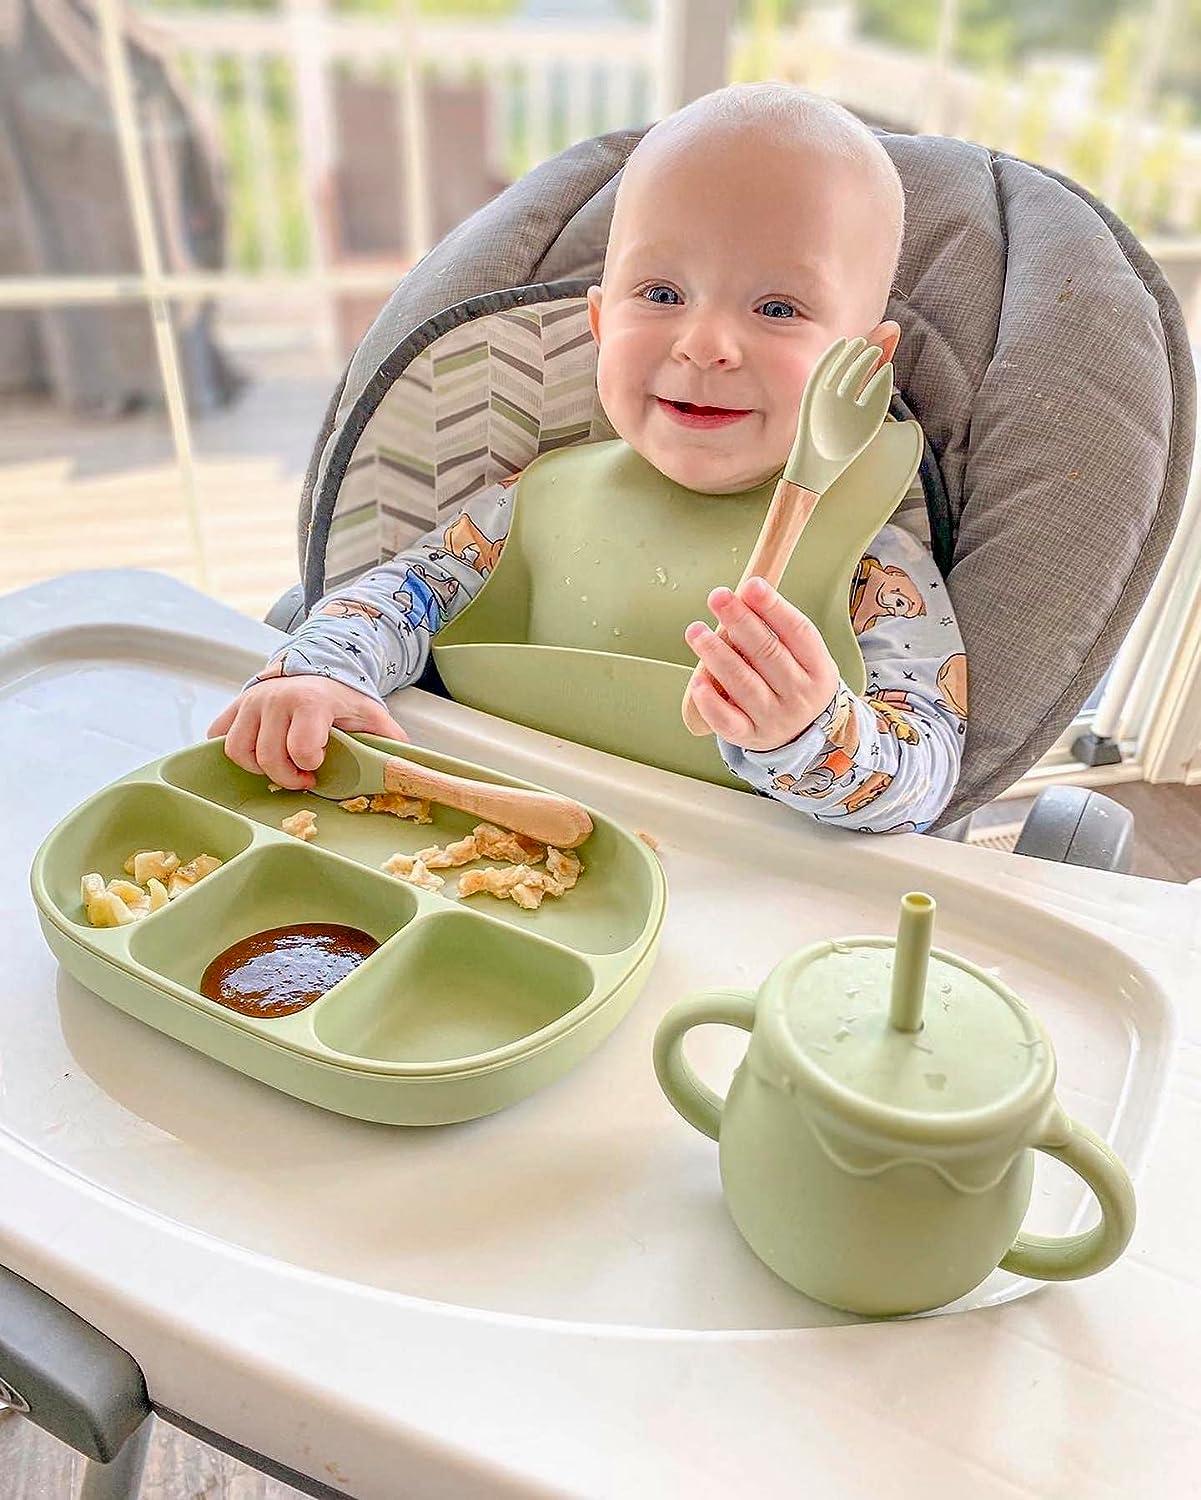 Skylarq Silicone Sippy Cups for Baby 6 Months and Open Toddler Cup